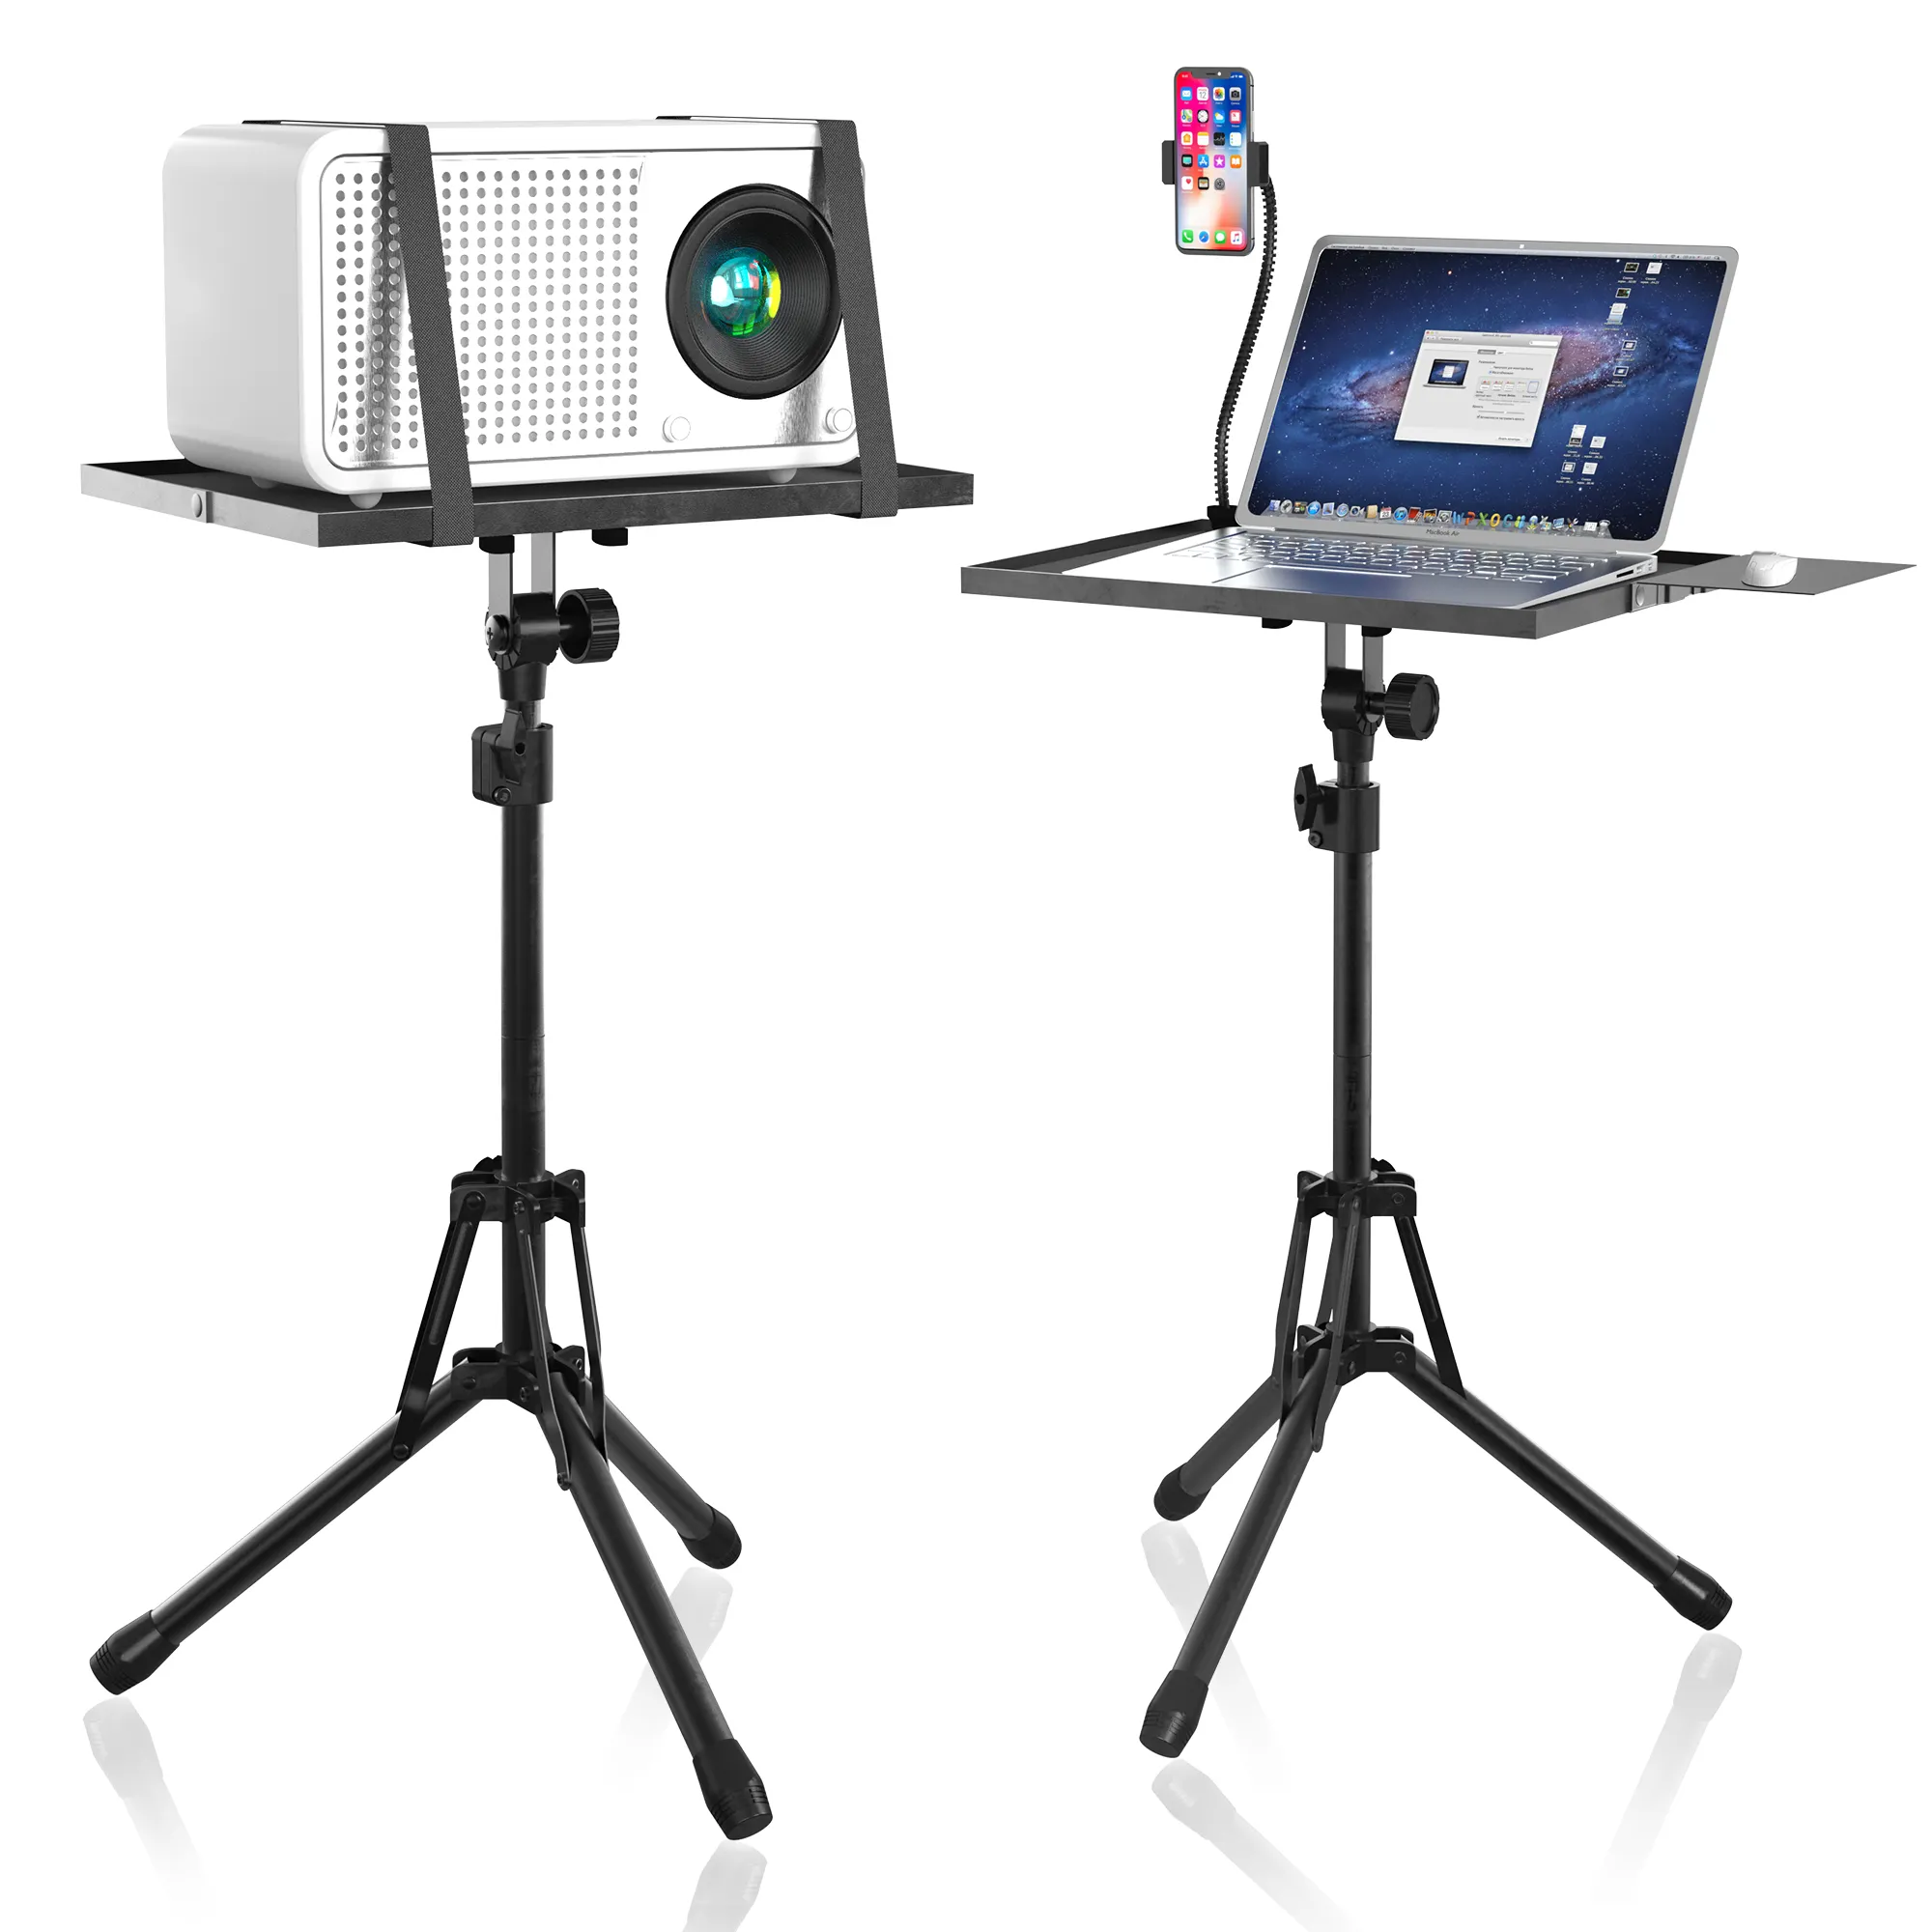 CYDISPLAY projector stand diy projector floor lift desktop laptop stand adjustable portable tripod stand for mini projector